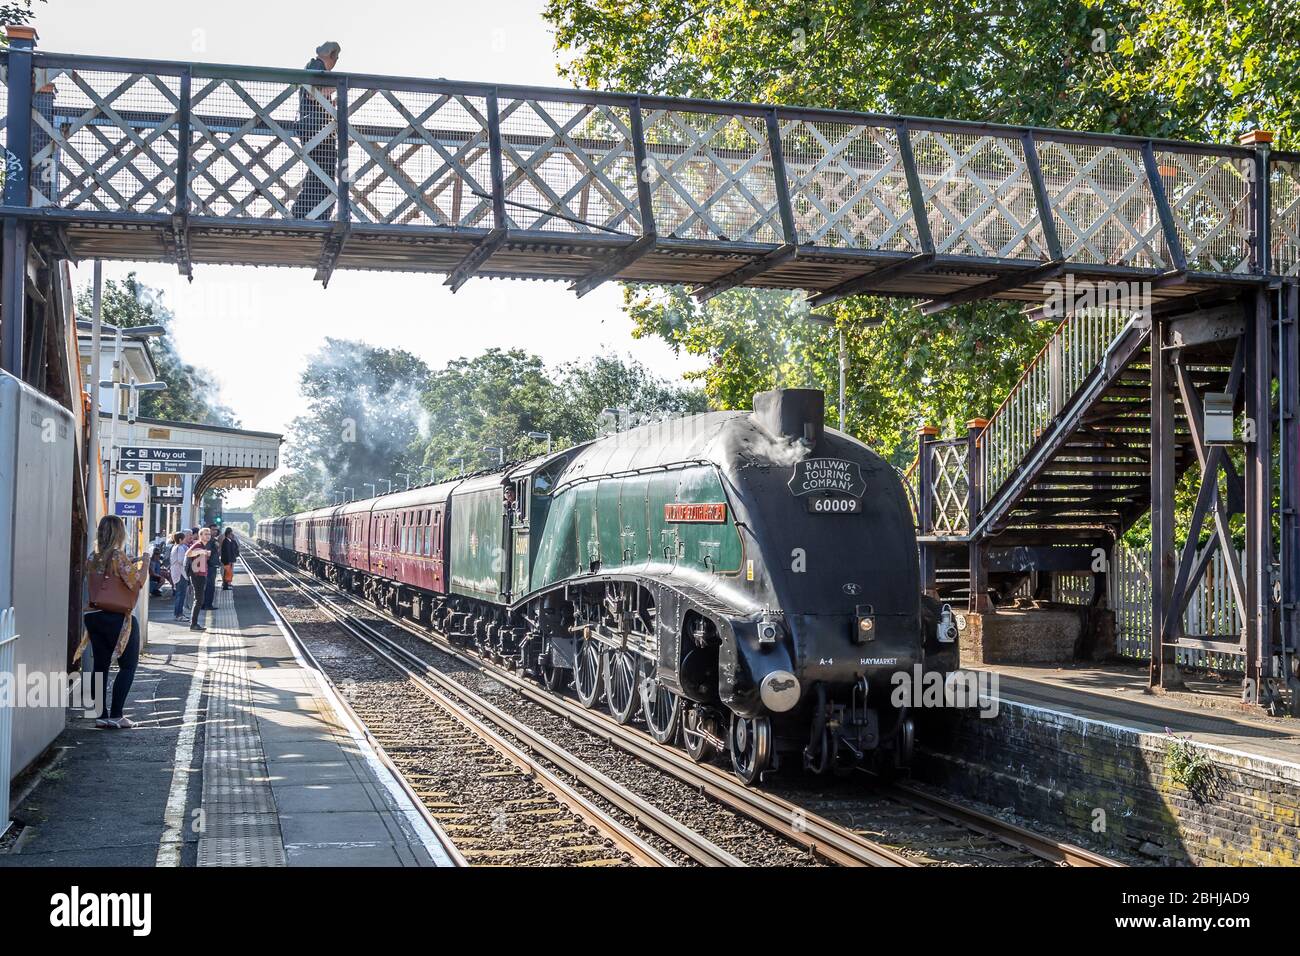 BR 'A4' 4-6-2 No. 60009 'Union of South Africa' passes through Chiswick station, London, England, UK Stock Photo